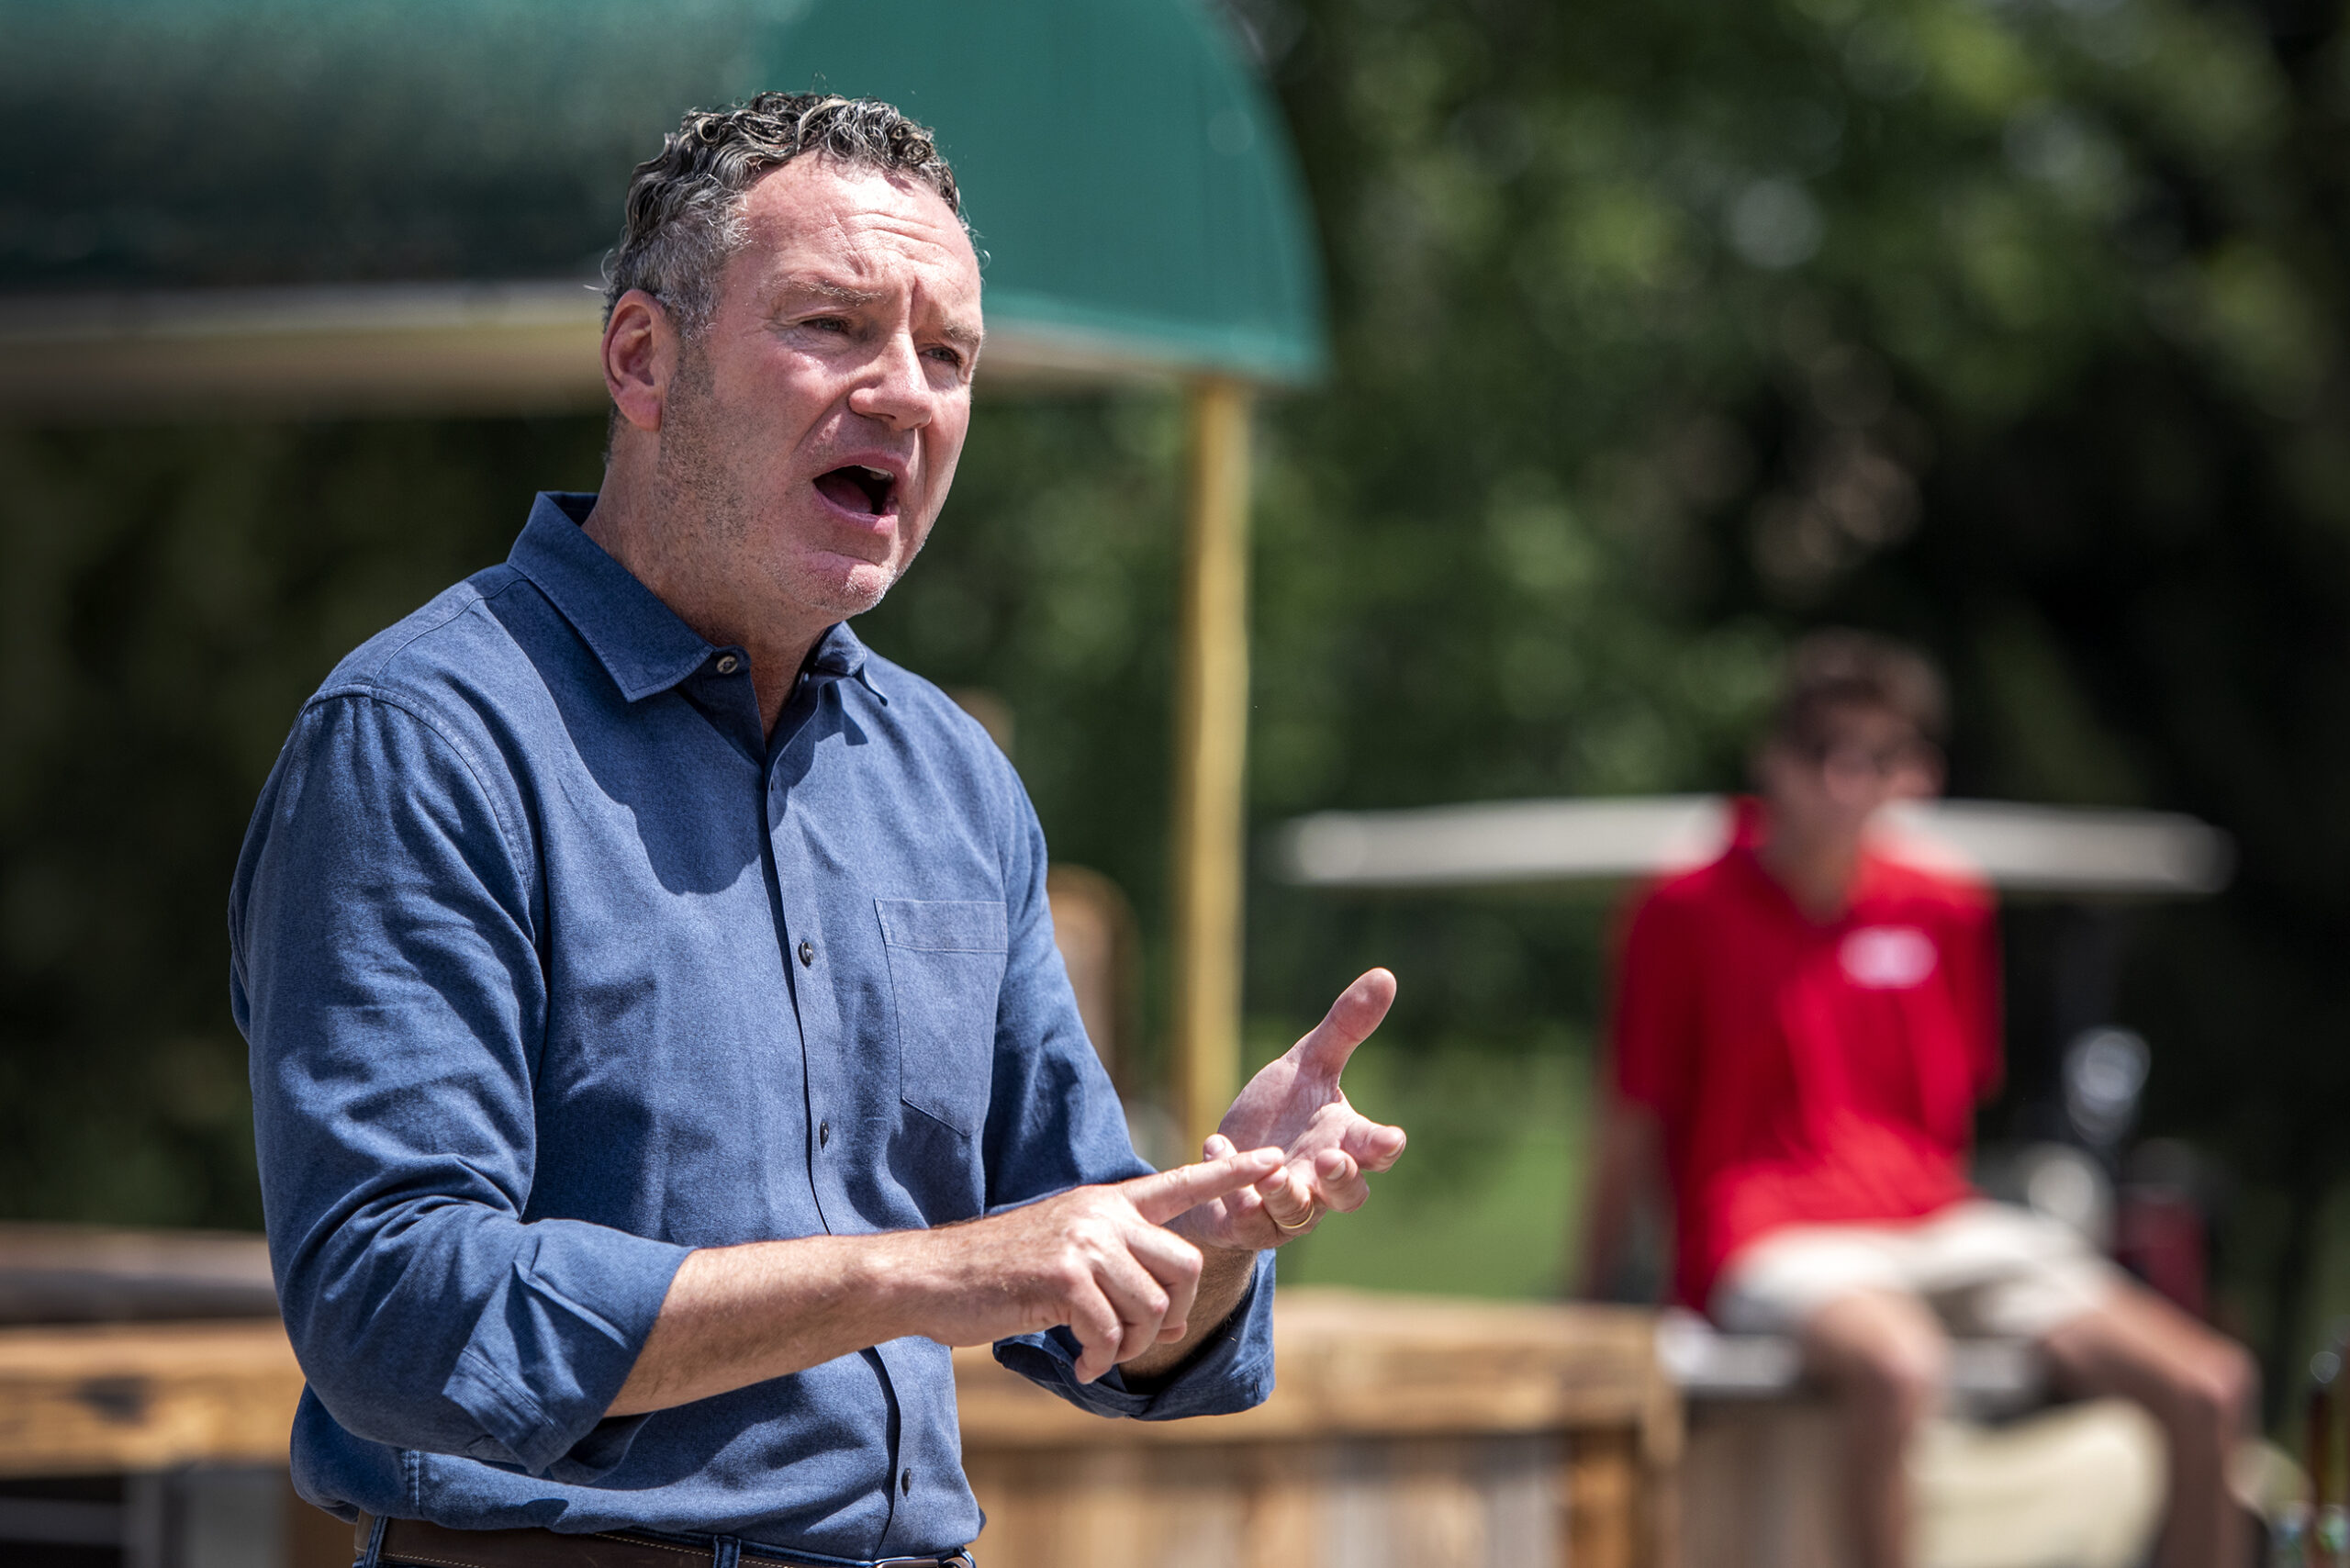 Tim Michels gestures as he speaks outside during an event.